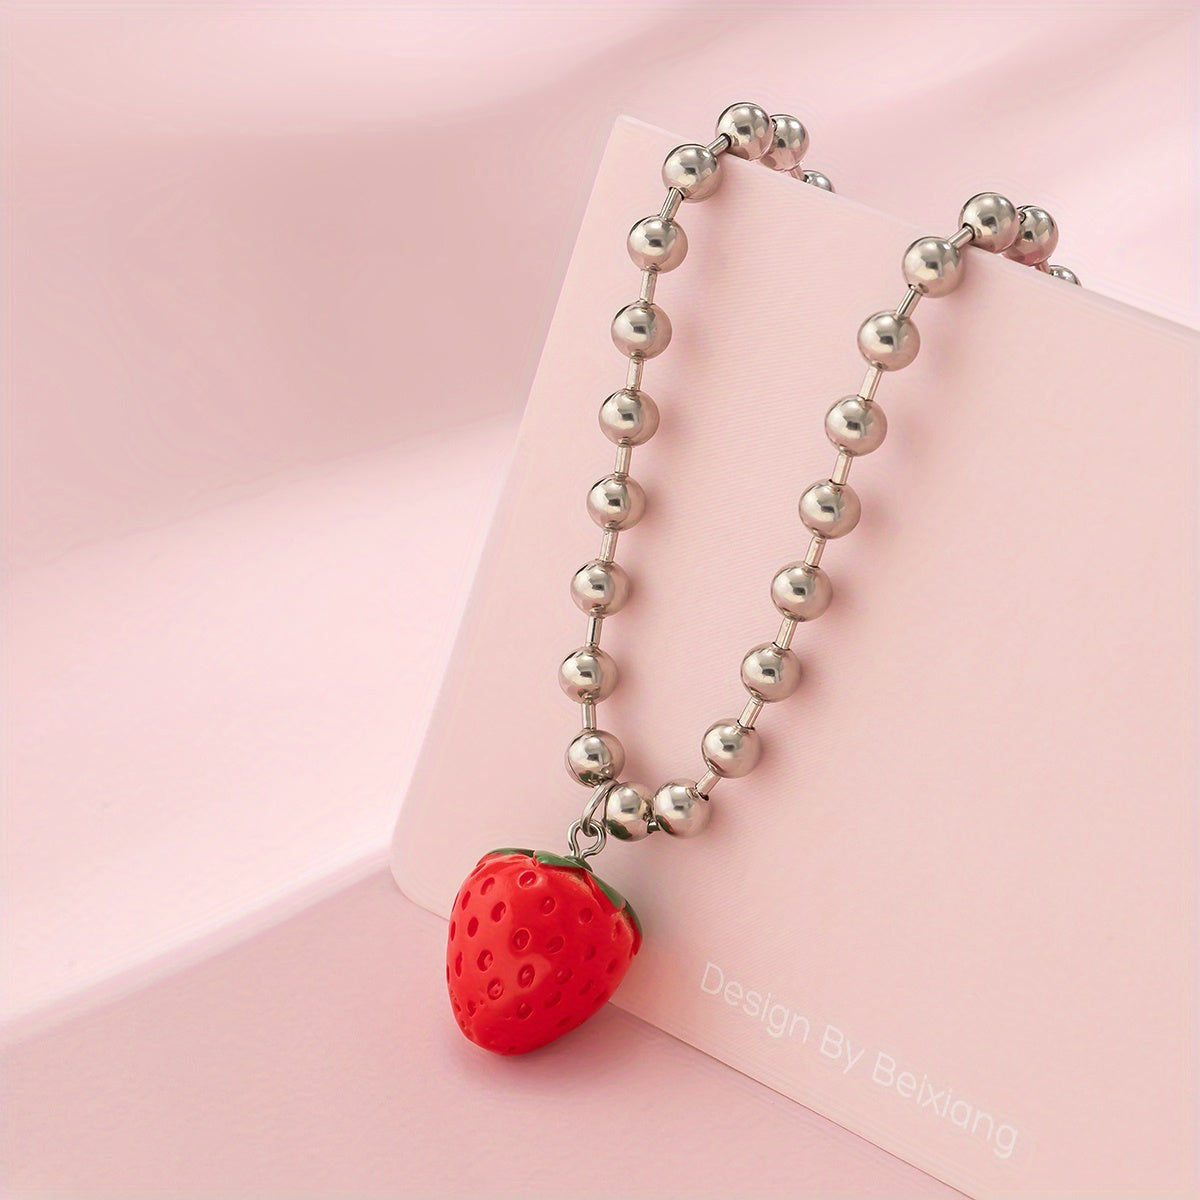 Sweet Strawberry Pendant Beaded Necklace - Perfect Gift for Girls for Summer Parties!